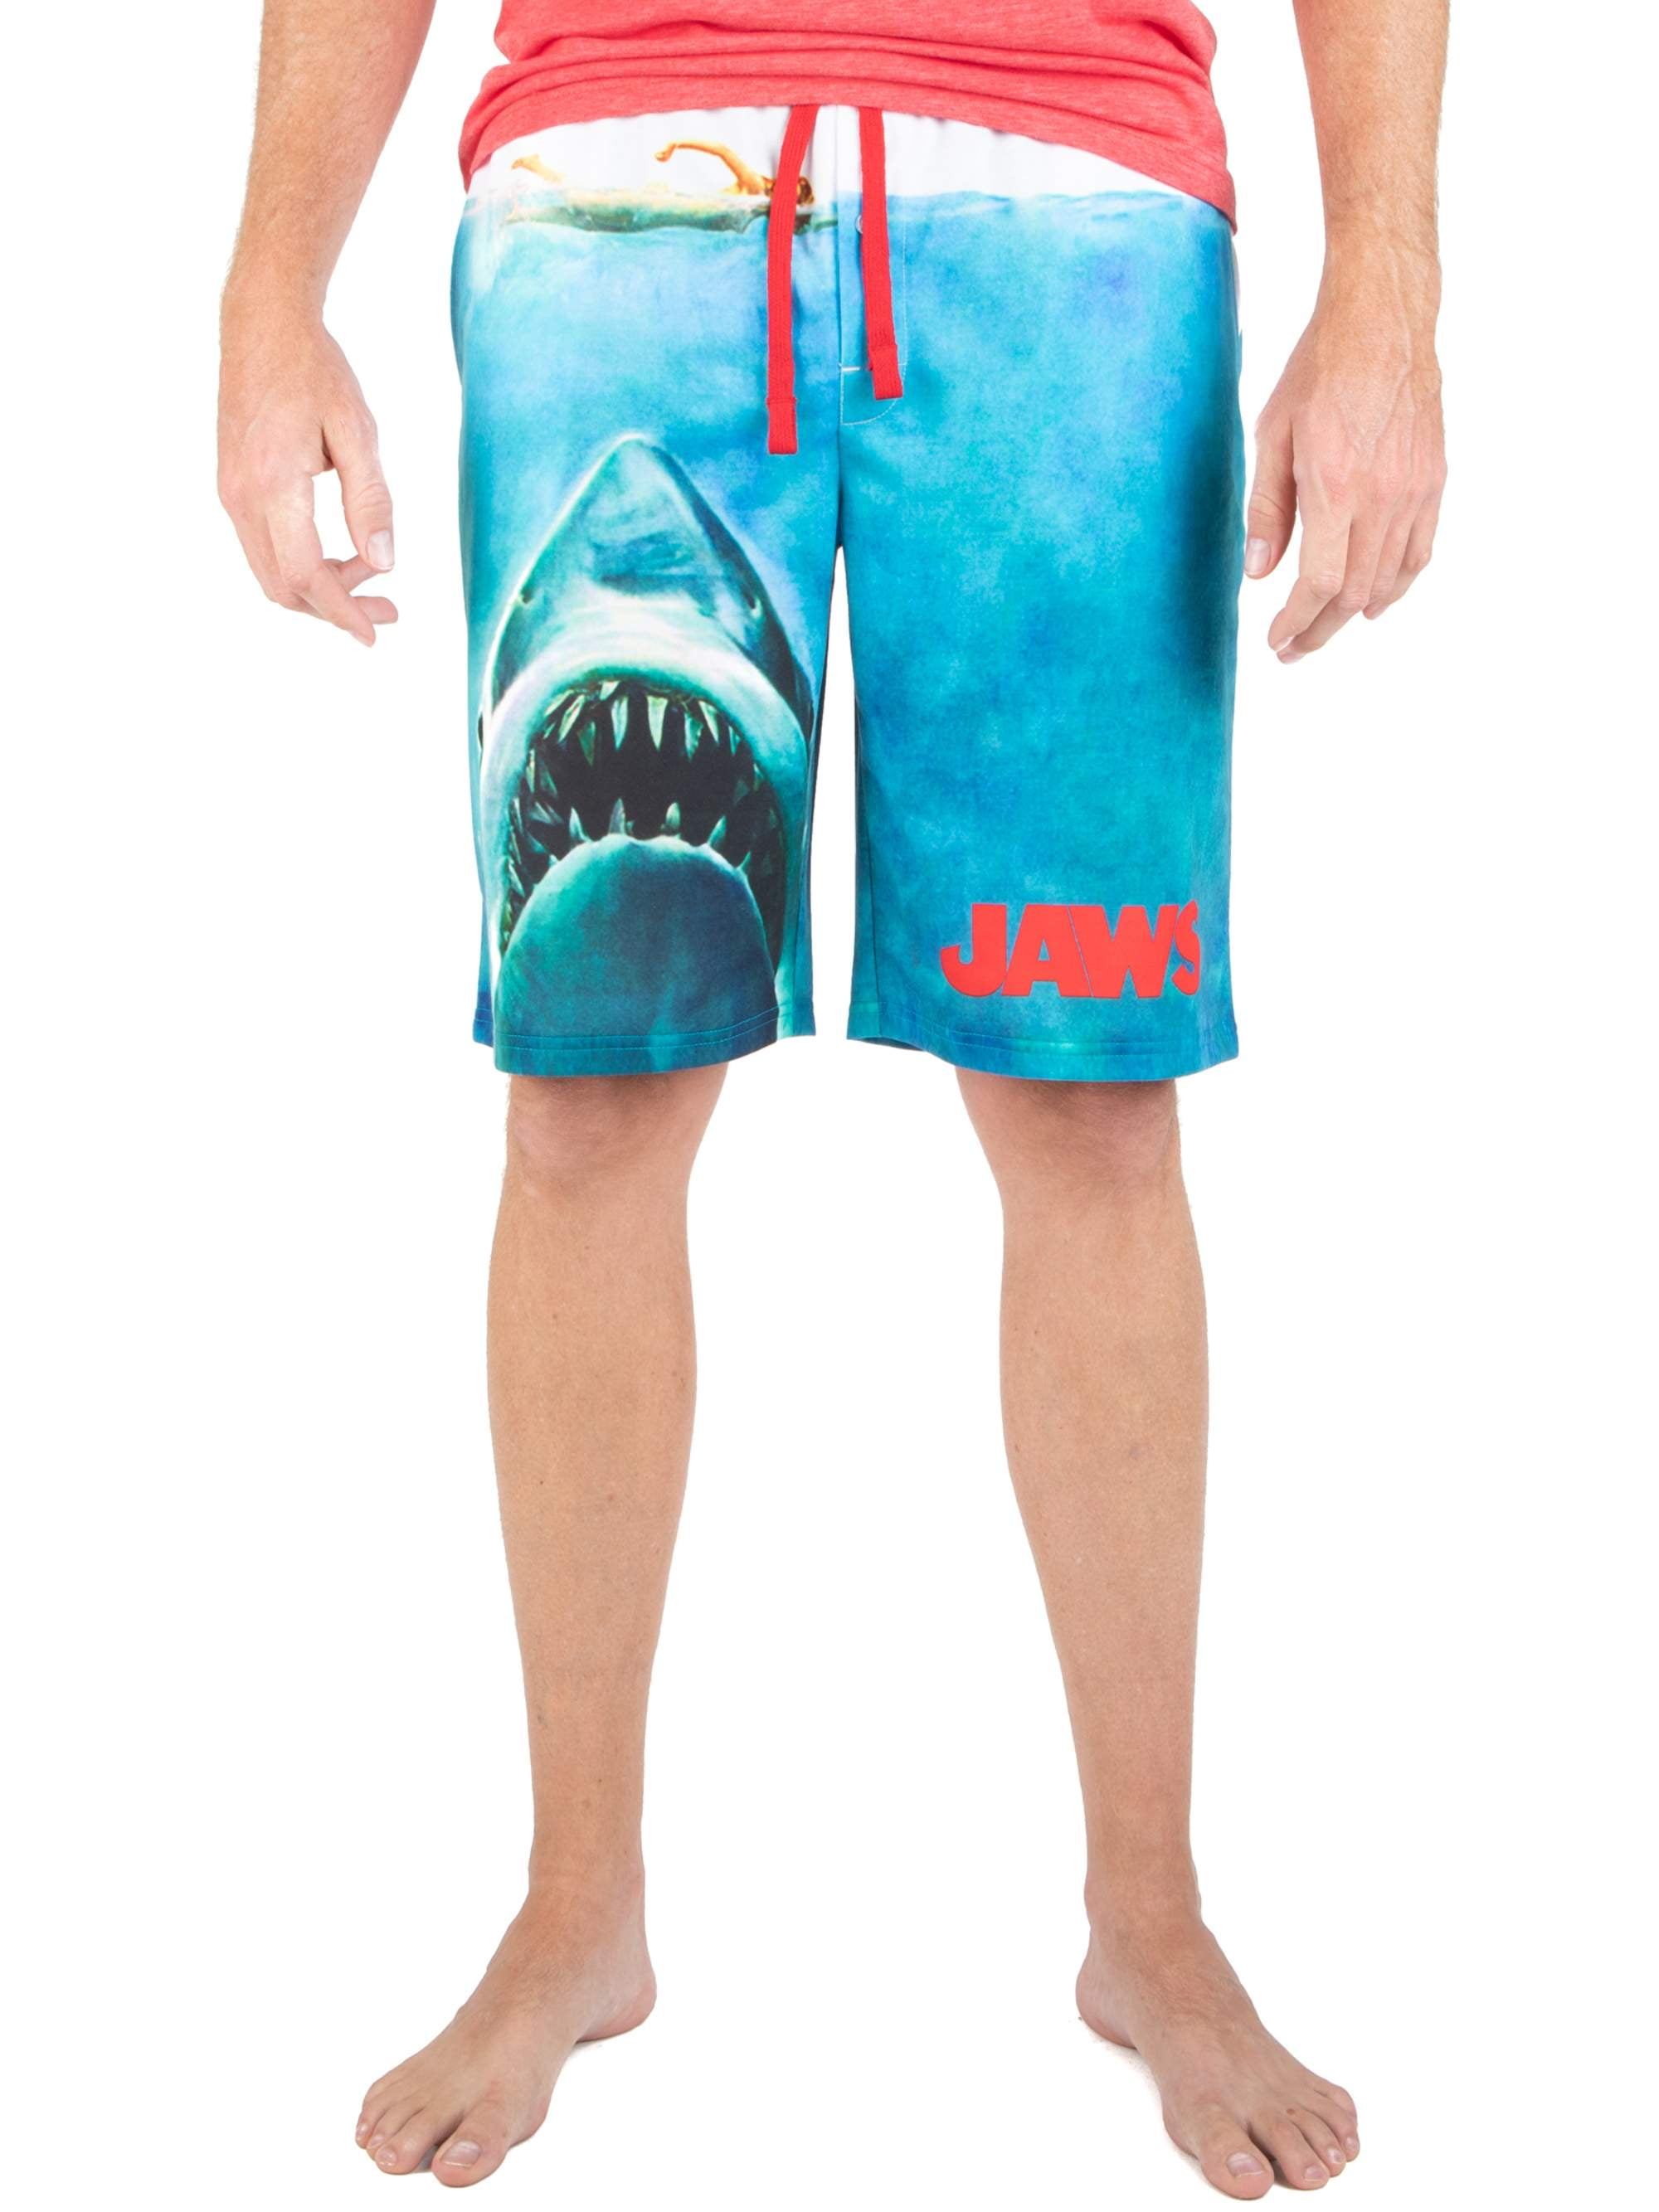 Jaws Mens Summer Board Shorts Swim Trunks Swimsuit Or Athletic Shorts with Pockets